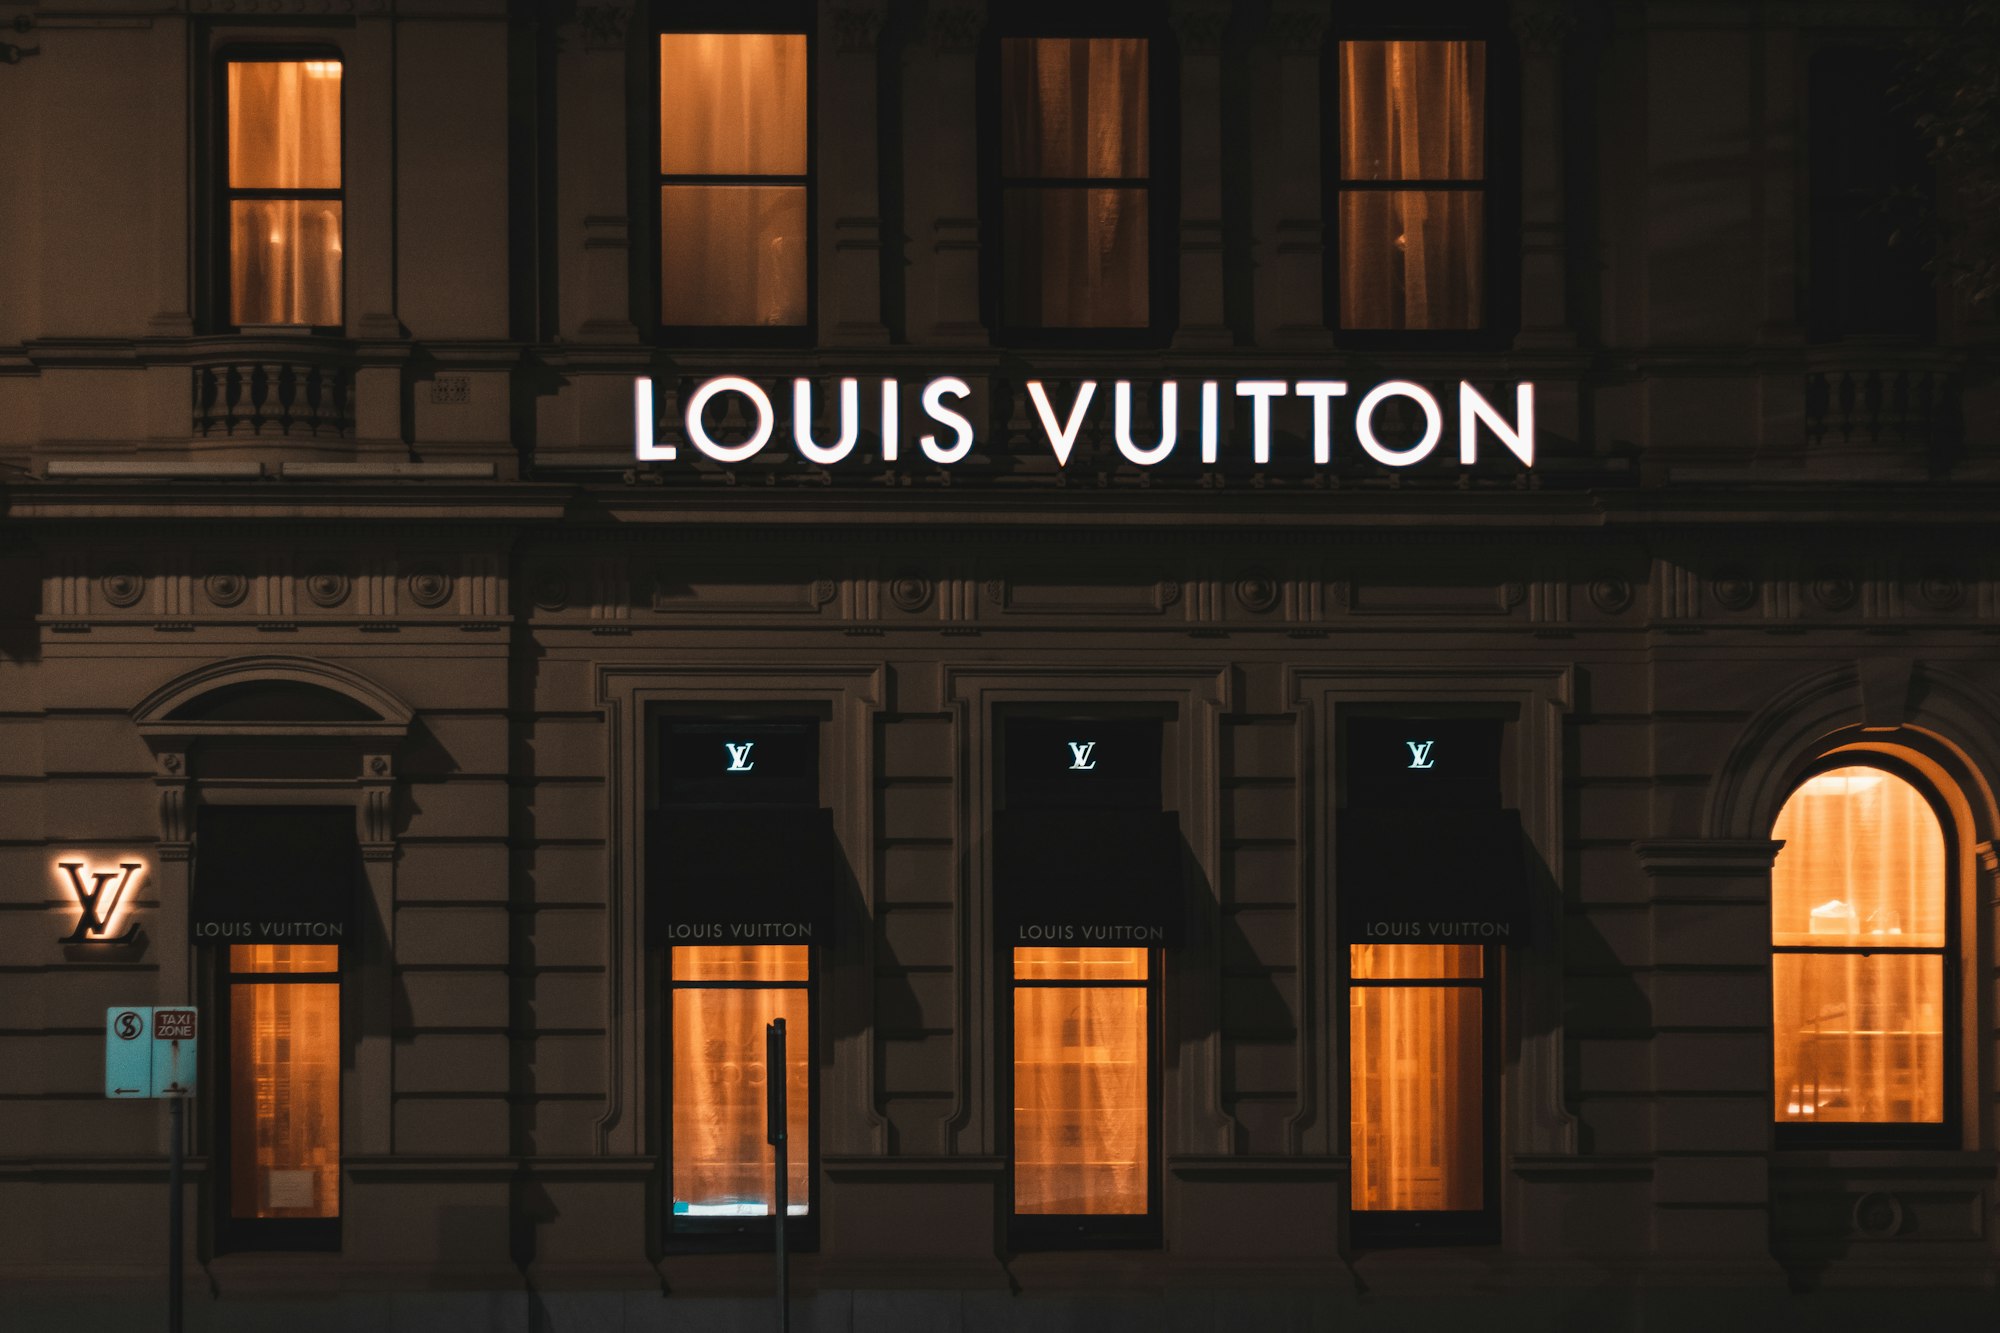 LVMH Sales DOWN, Demand for Luxury Bags DROPPING Among High End Customers